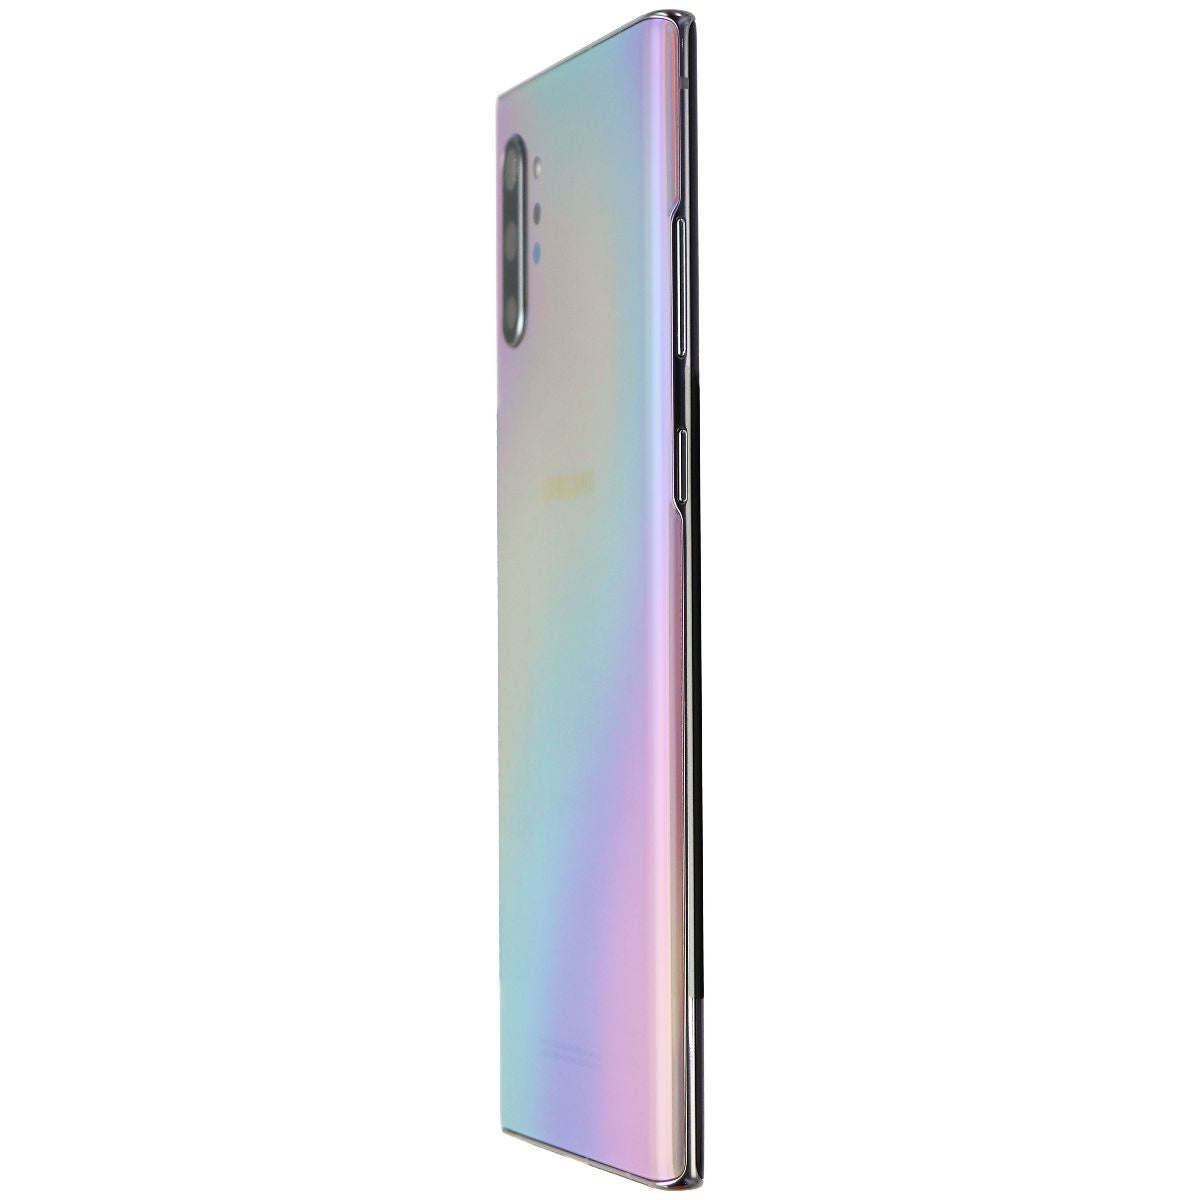 Samsung Galaxy Note10+ (6.8) SM-N975U (Wi-Fi Only) - 256GB / Aura Glow - BAD SIM Cell Phones & Smartphones Samsung    - Simple Cell Bulk Wholesale Pricing - USA Seller